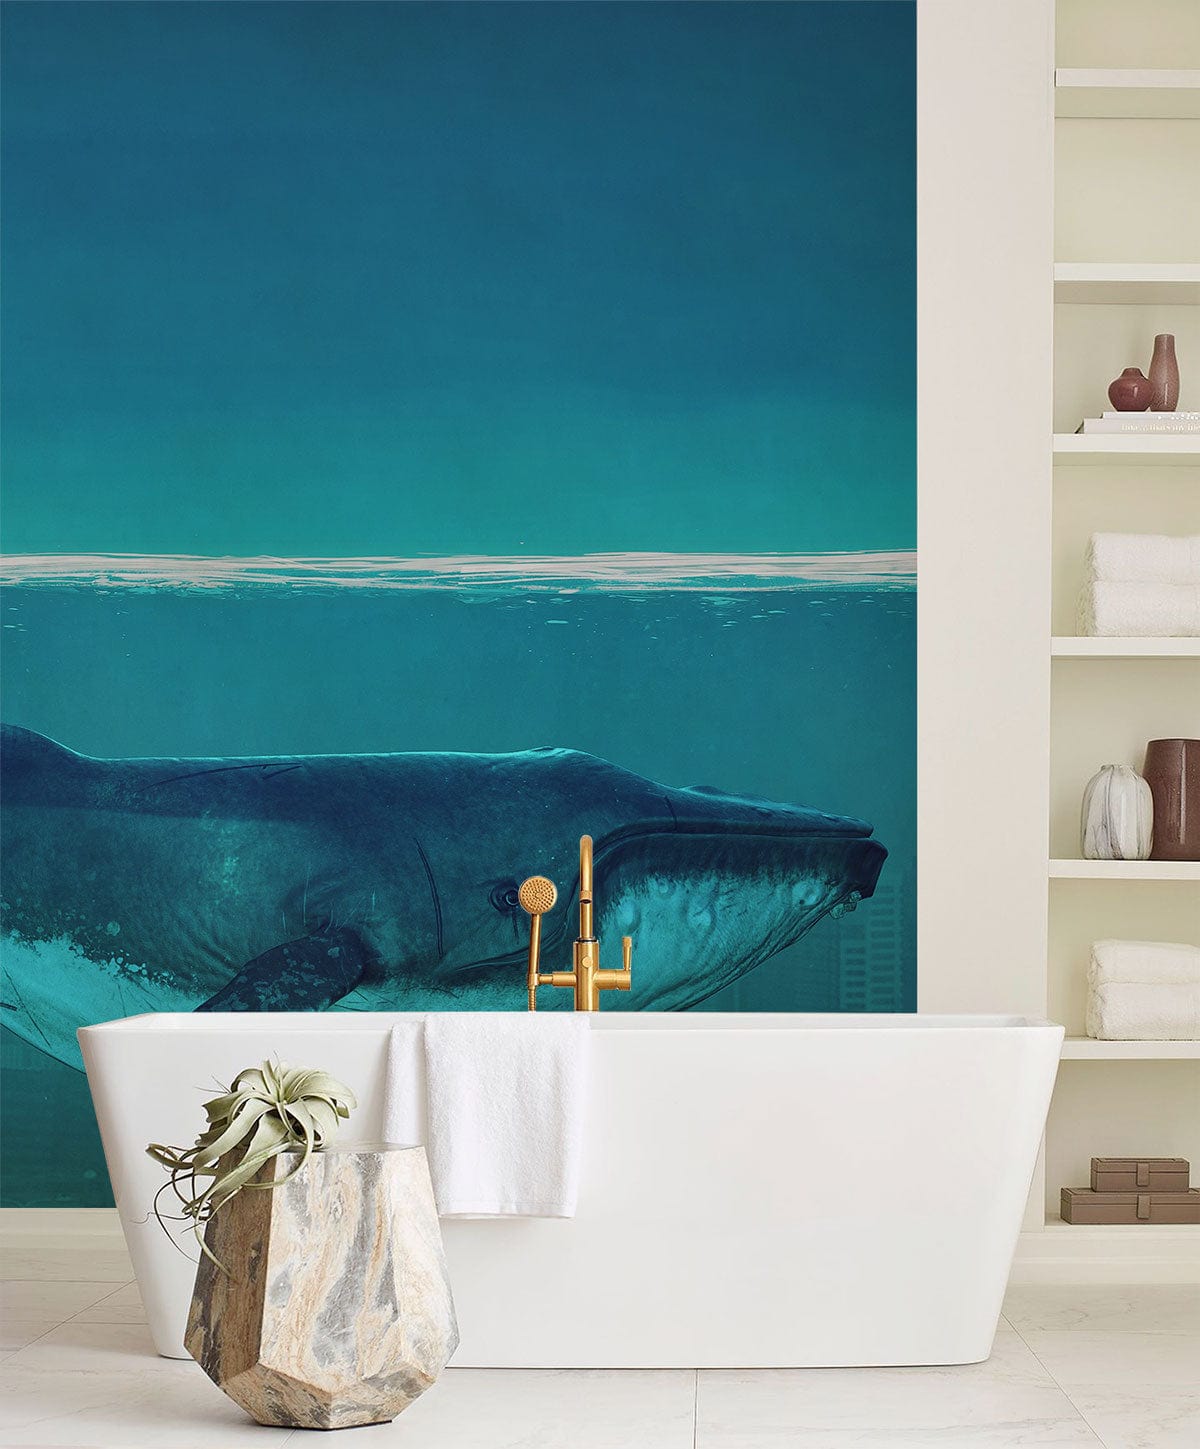 Whale in Ocean City Wallpaper Decoration